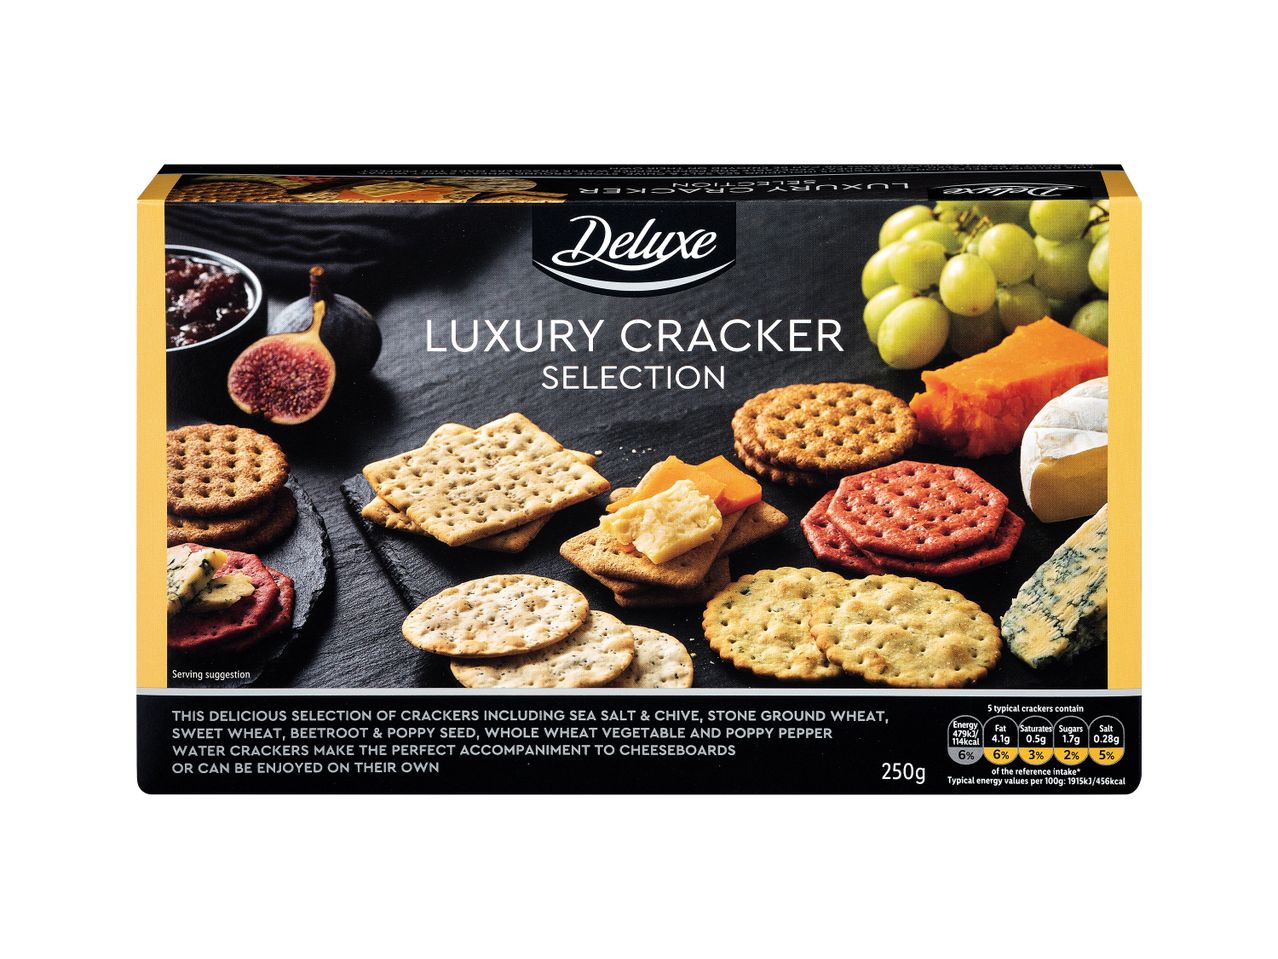 Go to full screen view: Deluxe Premium Cracker Selection - Image 1